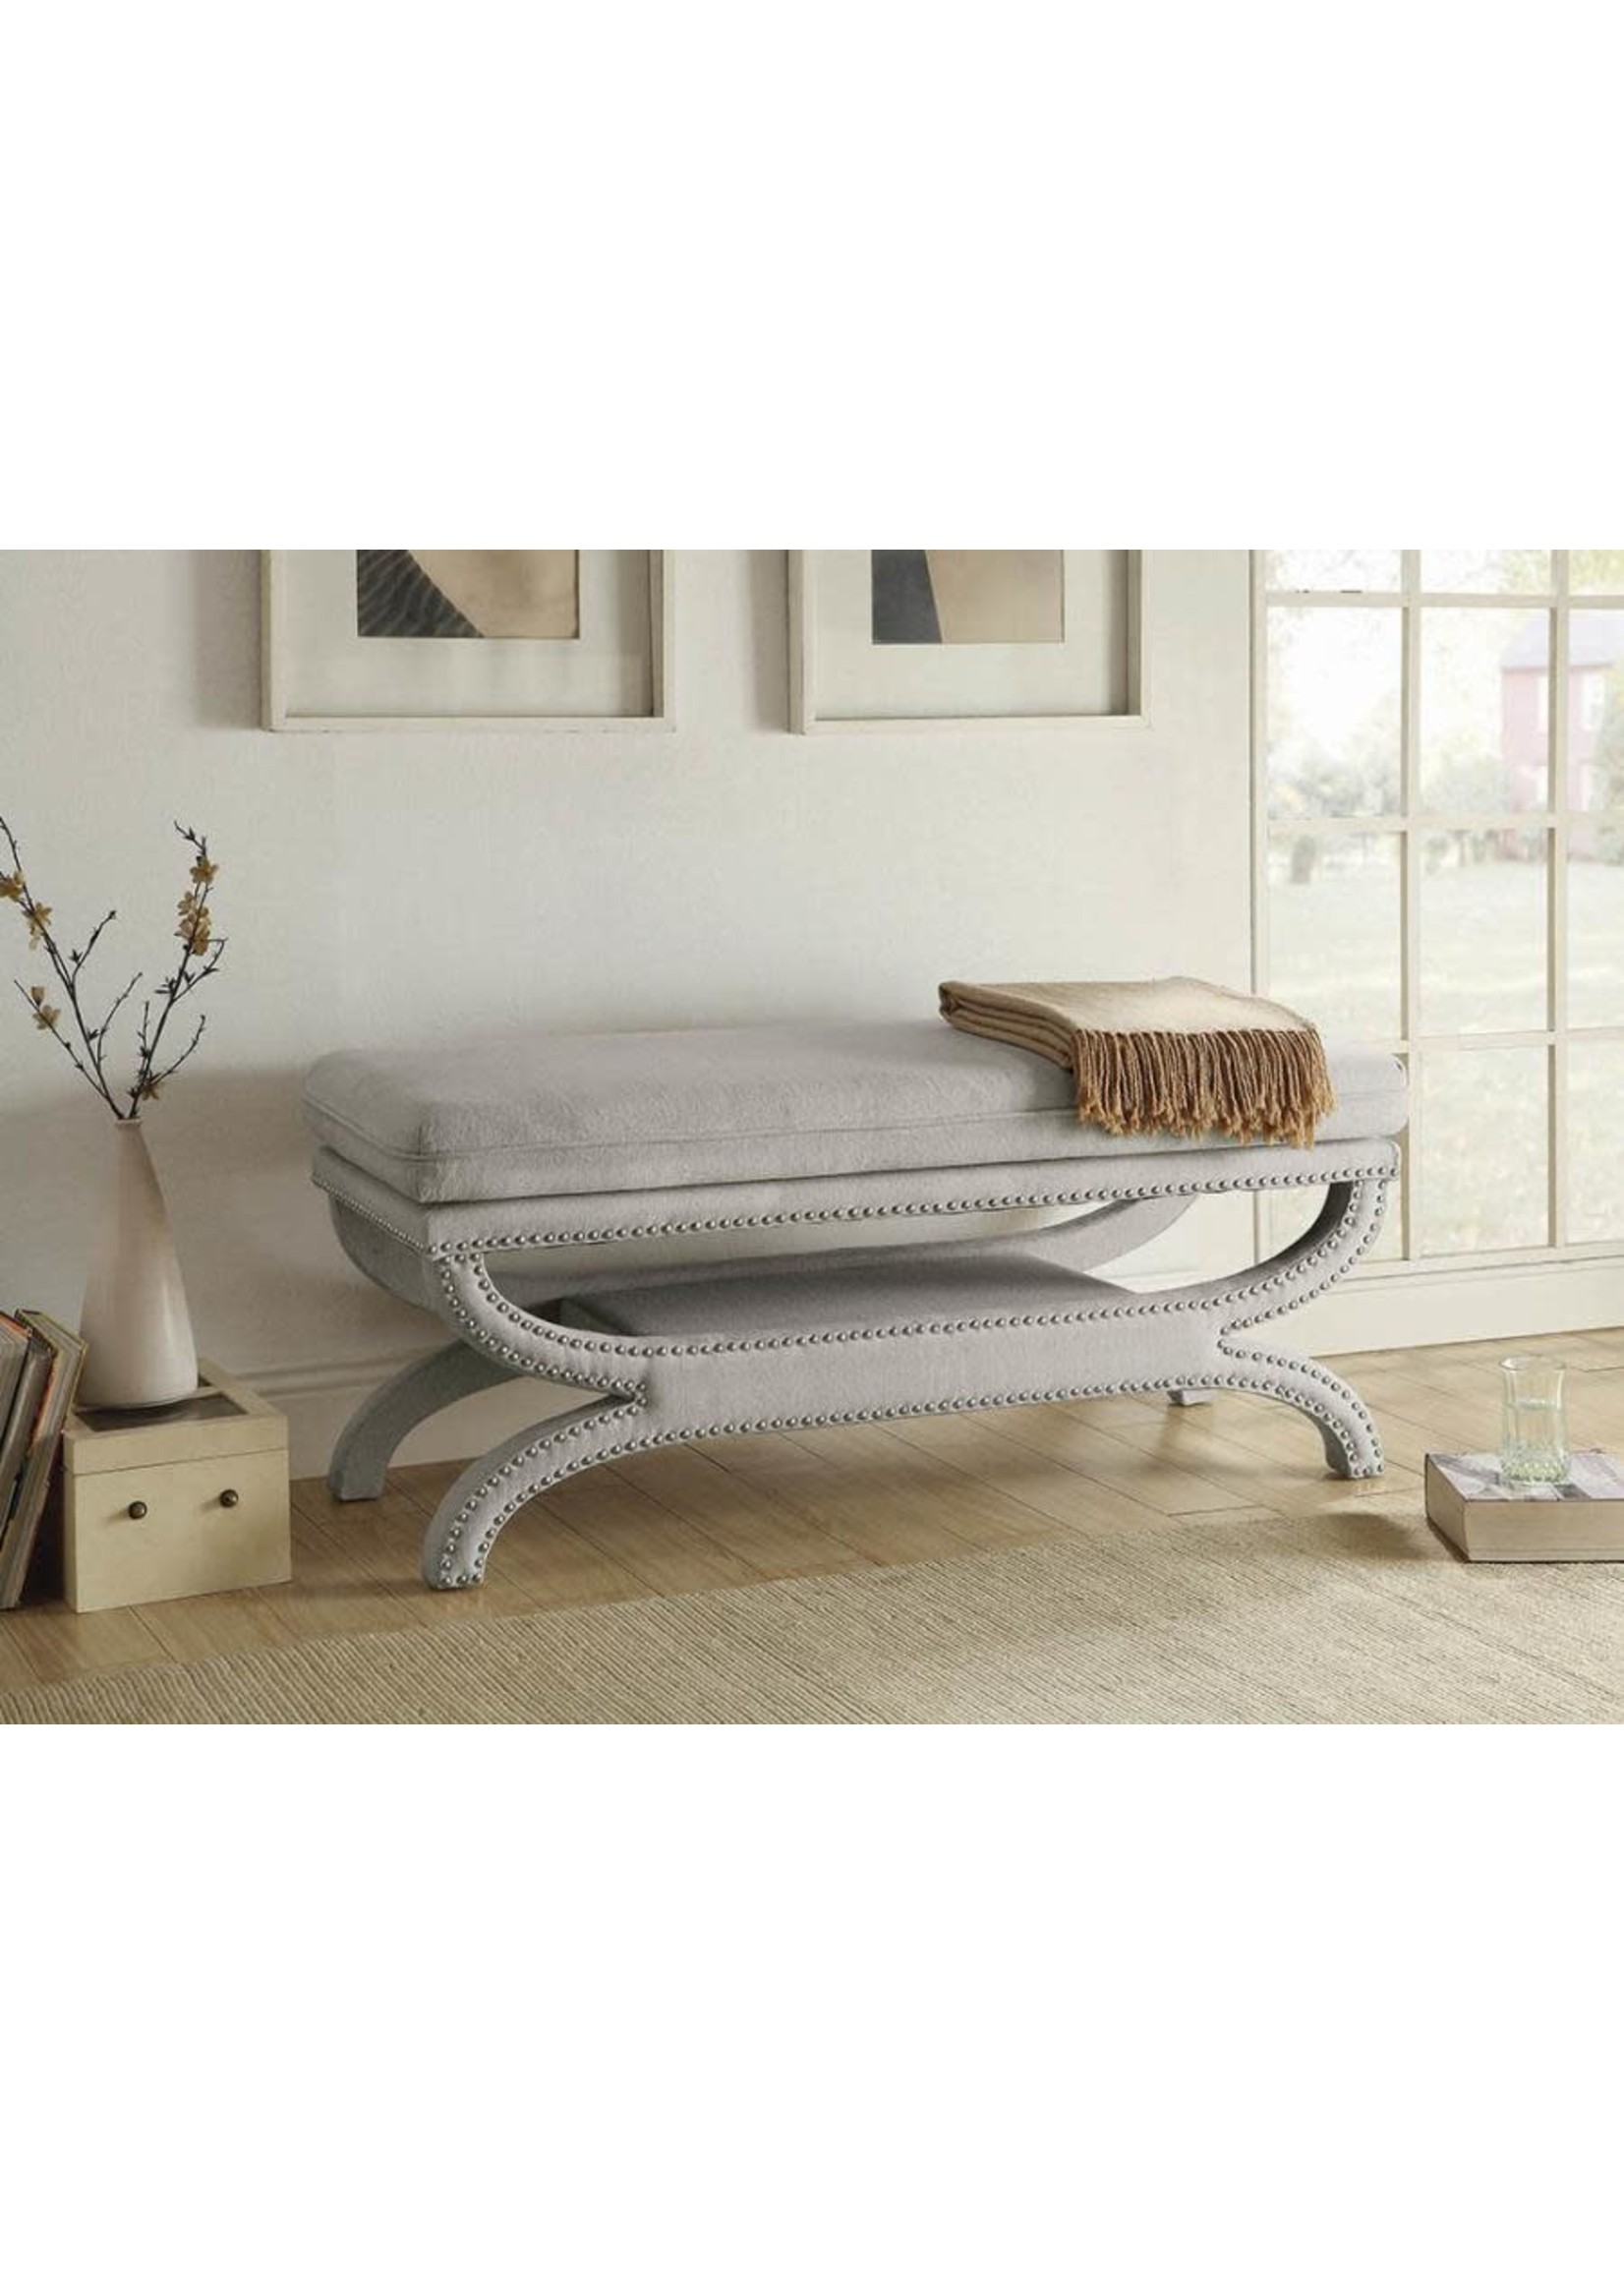 COASTER 500004 UPHOLSTERED BENCH CAMILLE CREAM